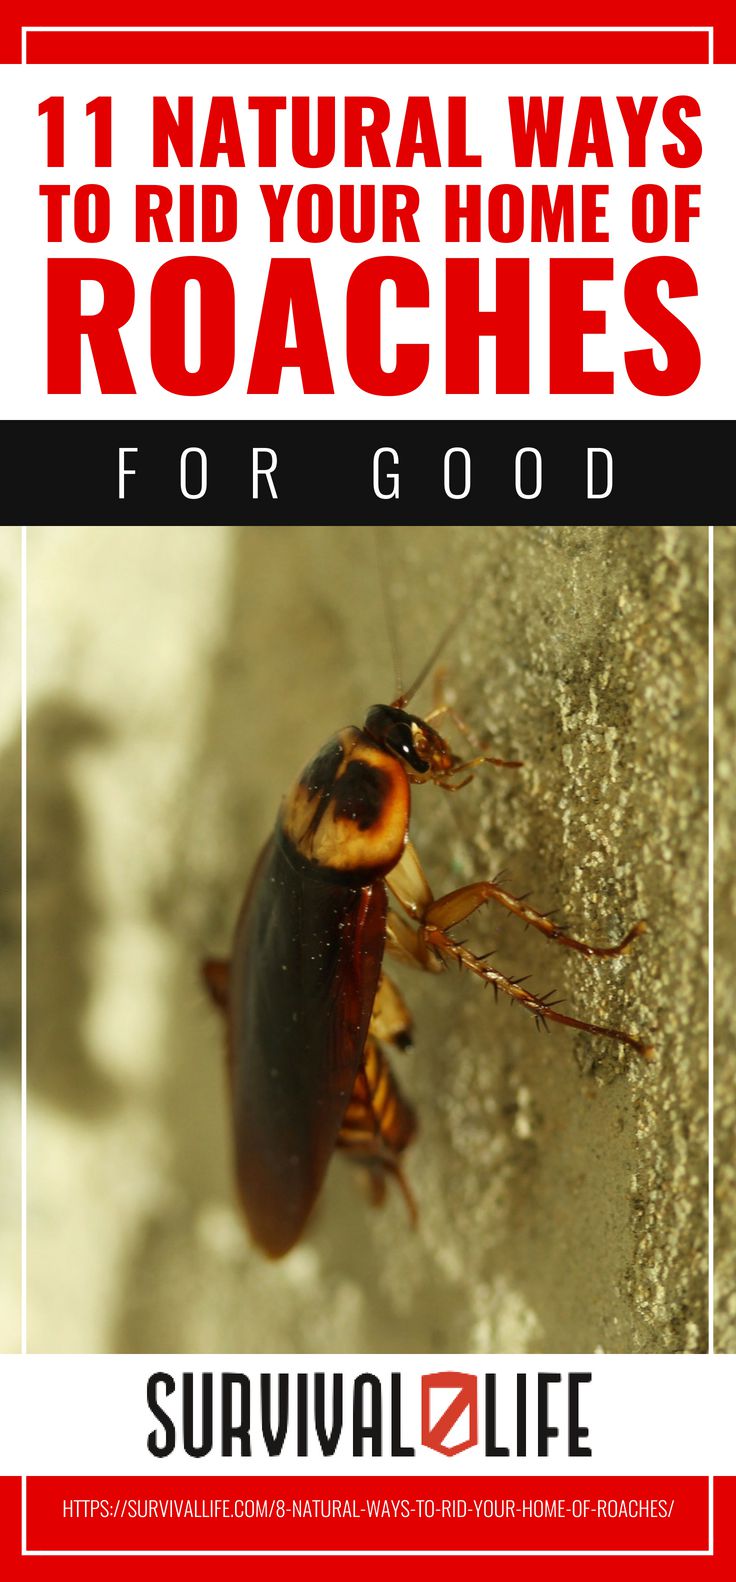 Natural Ways To Rid Your Home Of Roaches For Good | https://survivallife.com/8-natural-ways-to-rid-your-home-of-roaches/